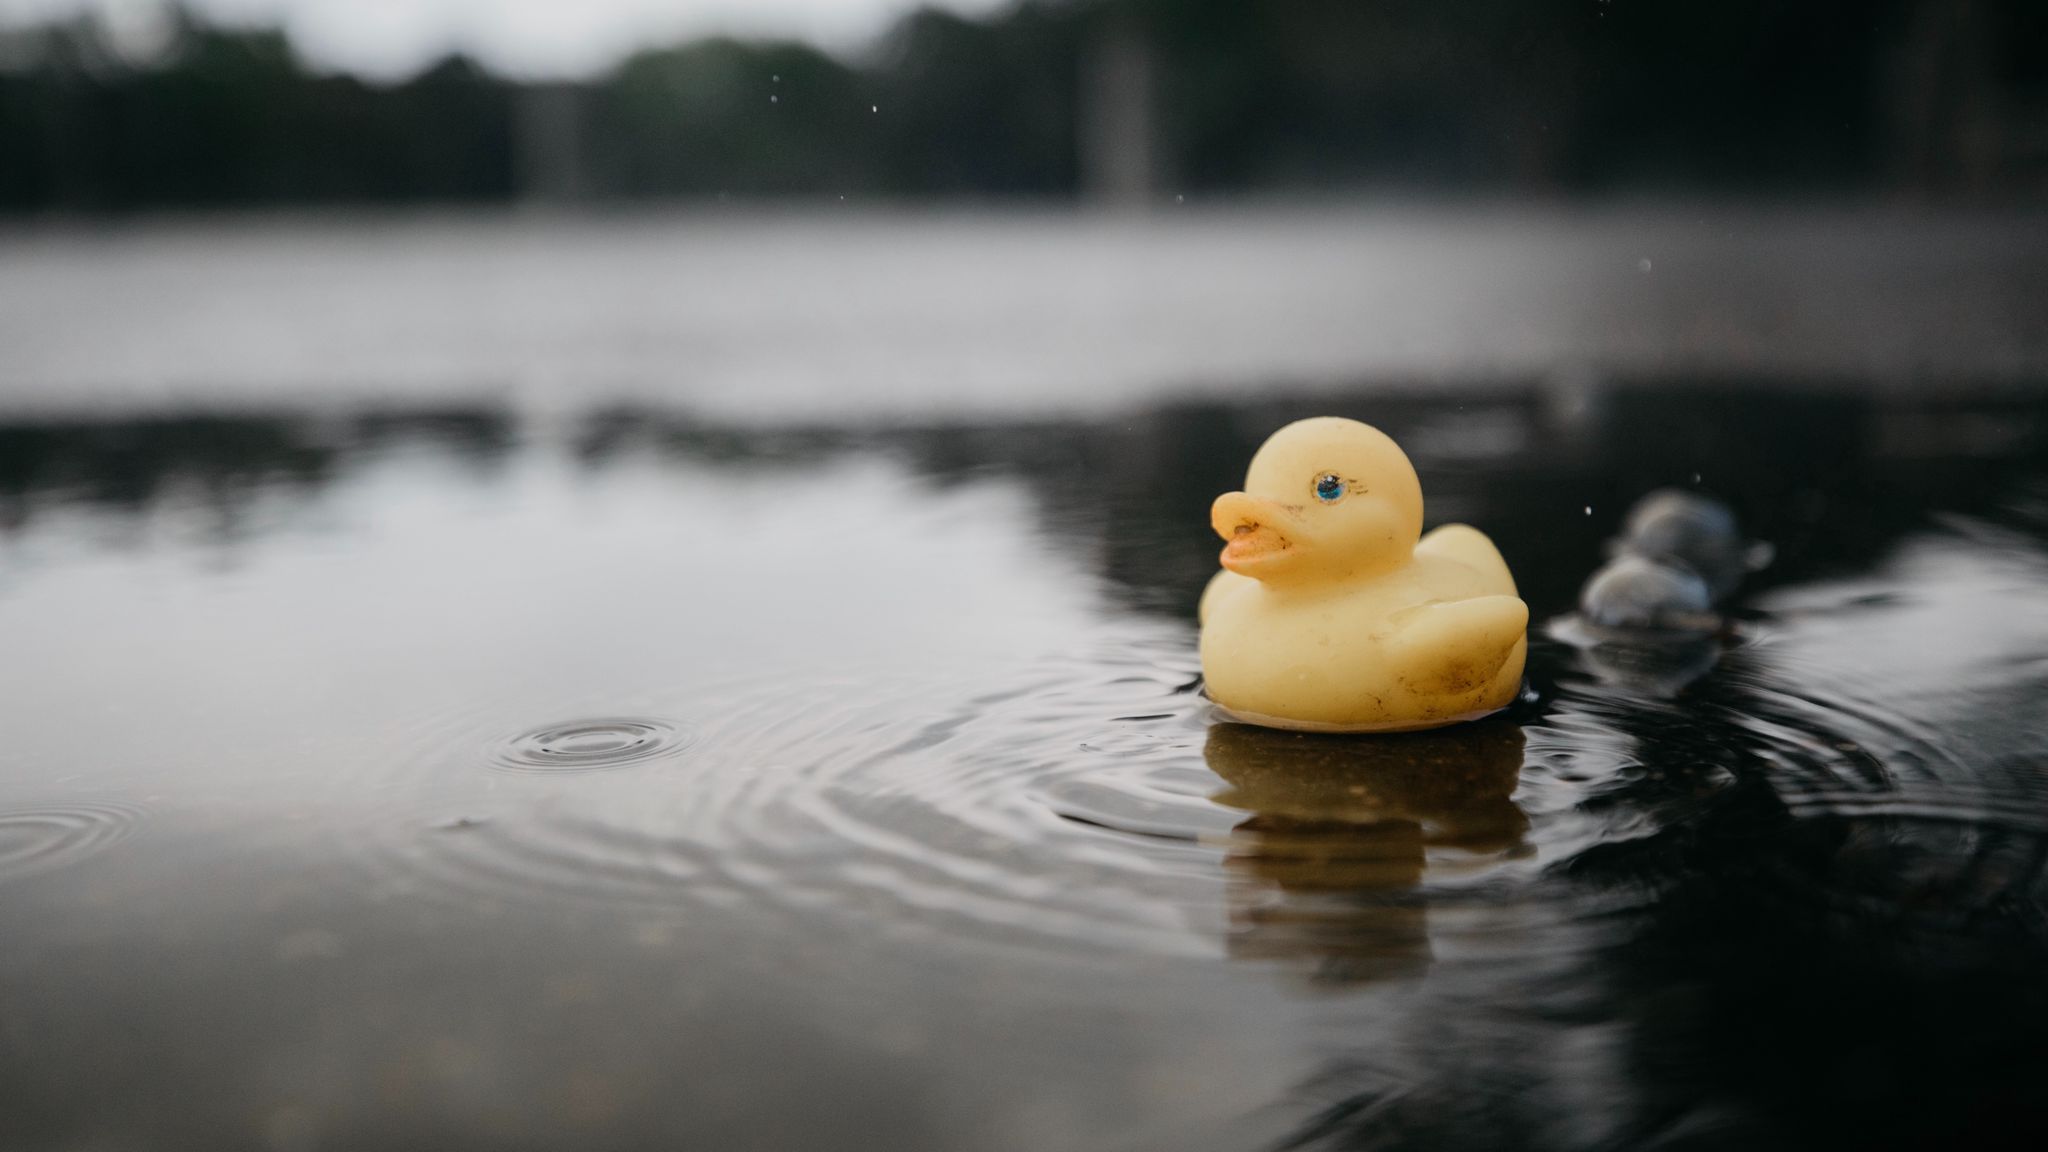 Wallpaper Rubber Duck, Duck, Toy, Puddle, Water Ducky In Puddle HD Wallpaper